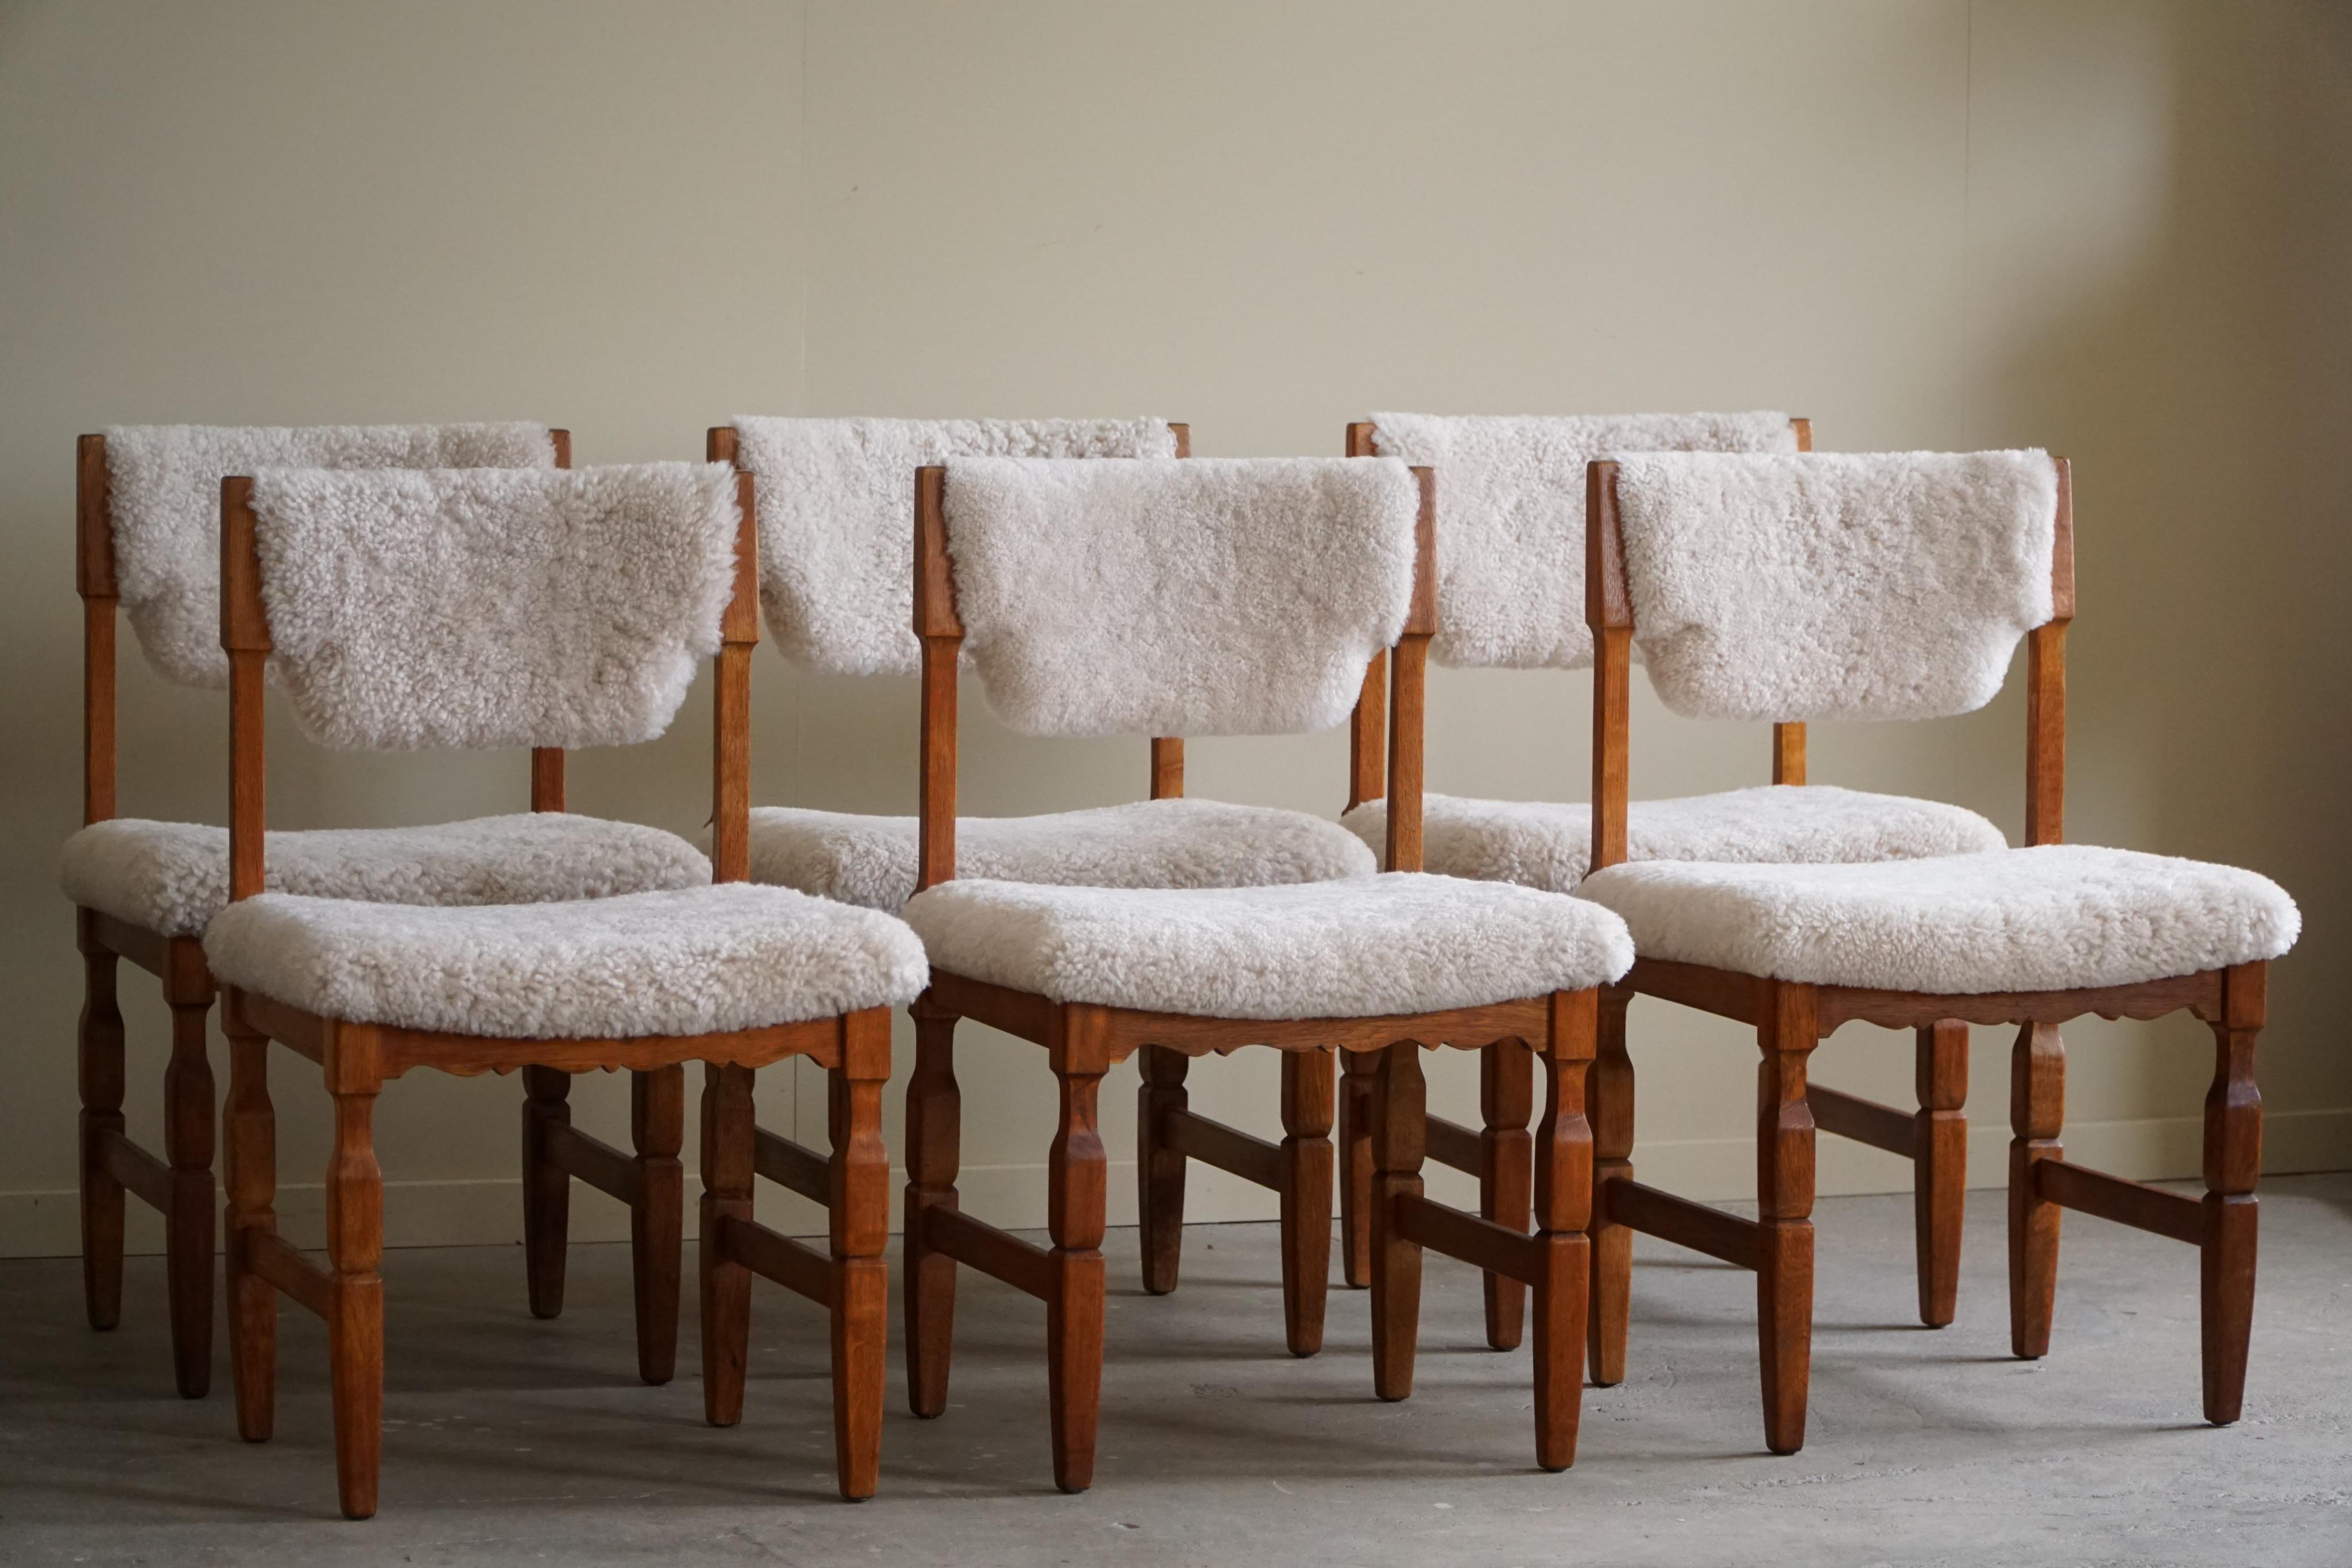 Set of 6 Dining Chairs in Oak & Lambswool, Danish Mid Century Modern, 1960s For Sale 10